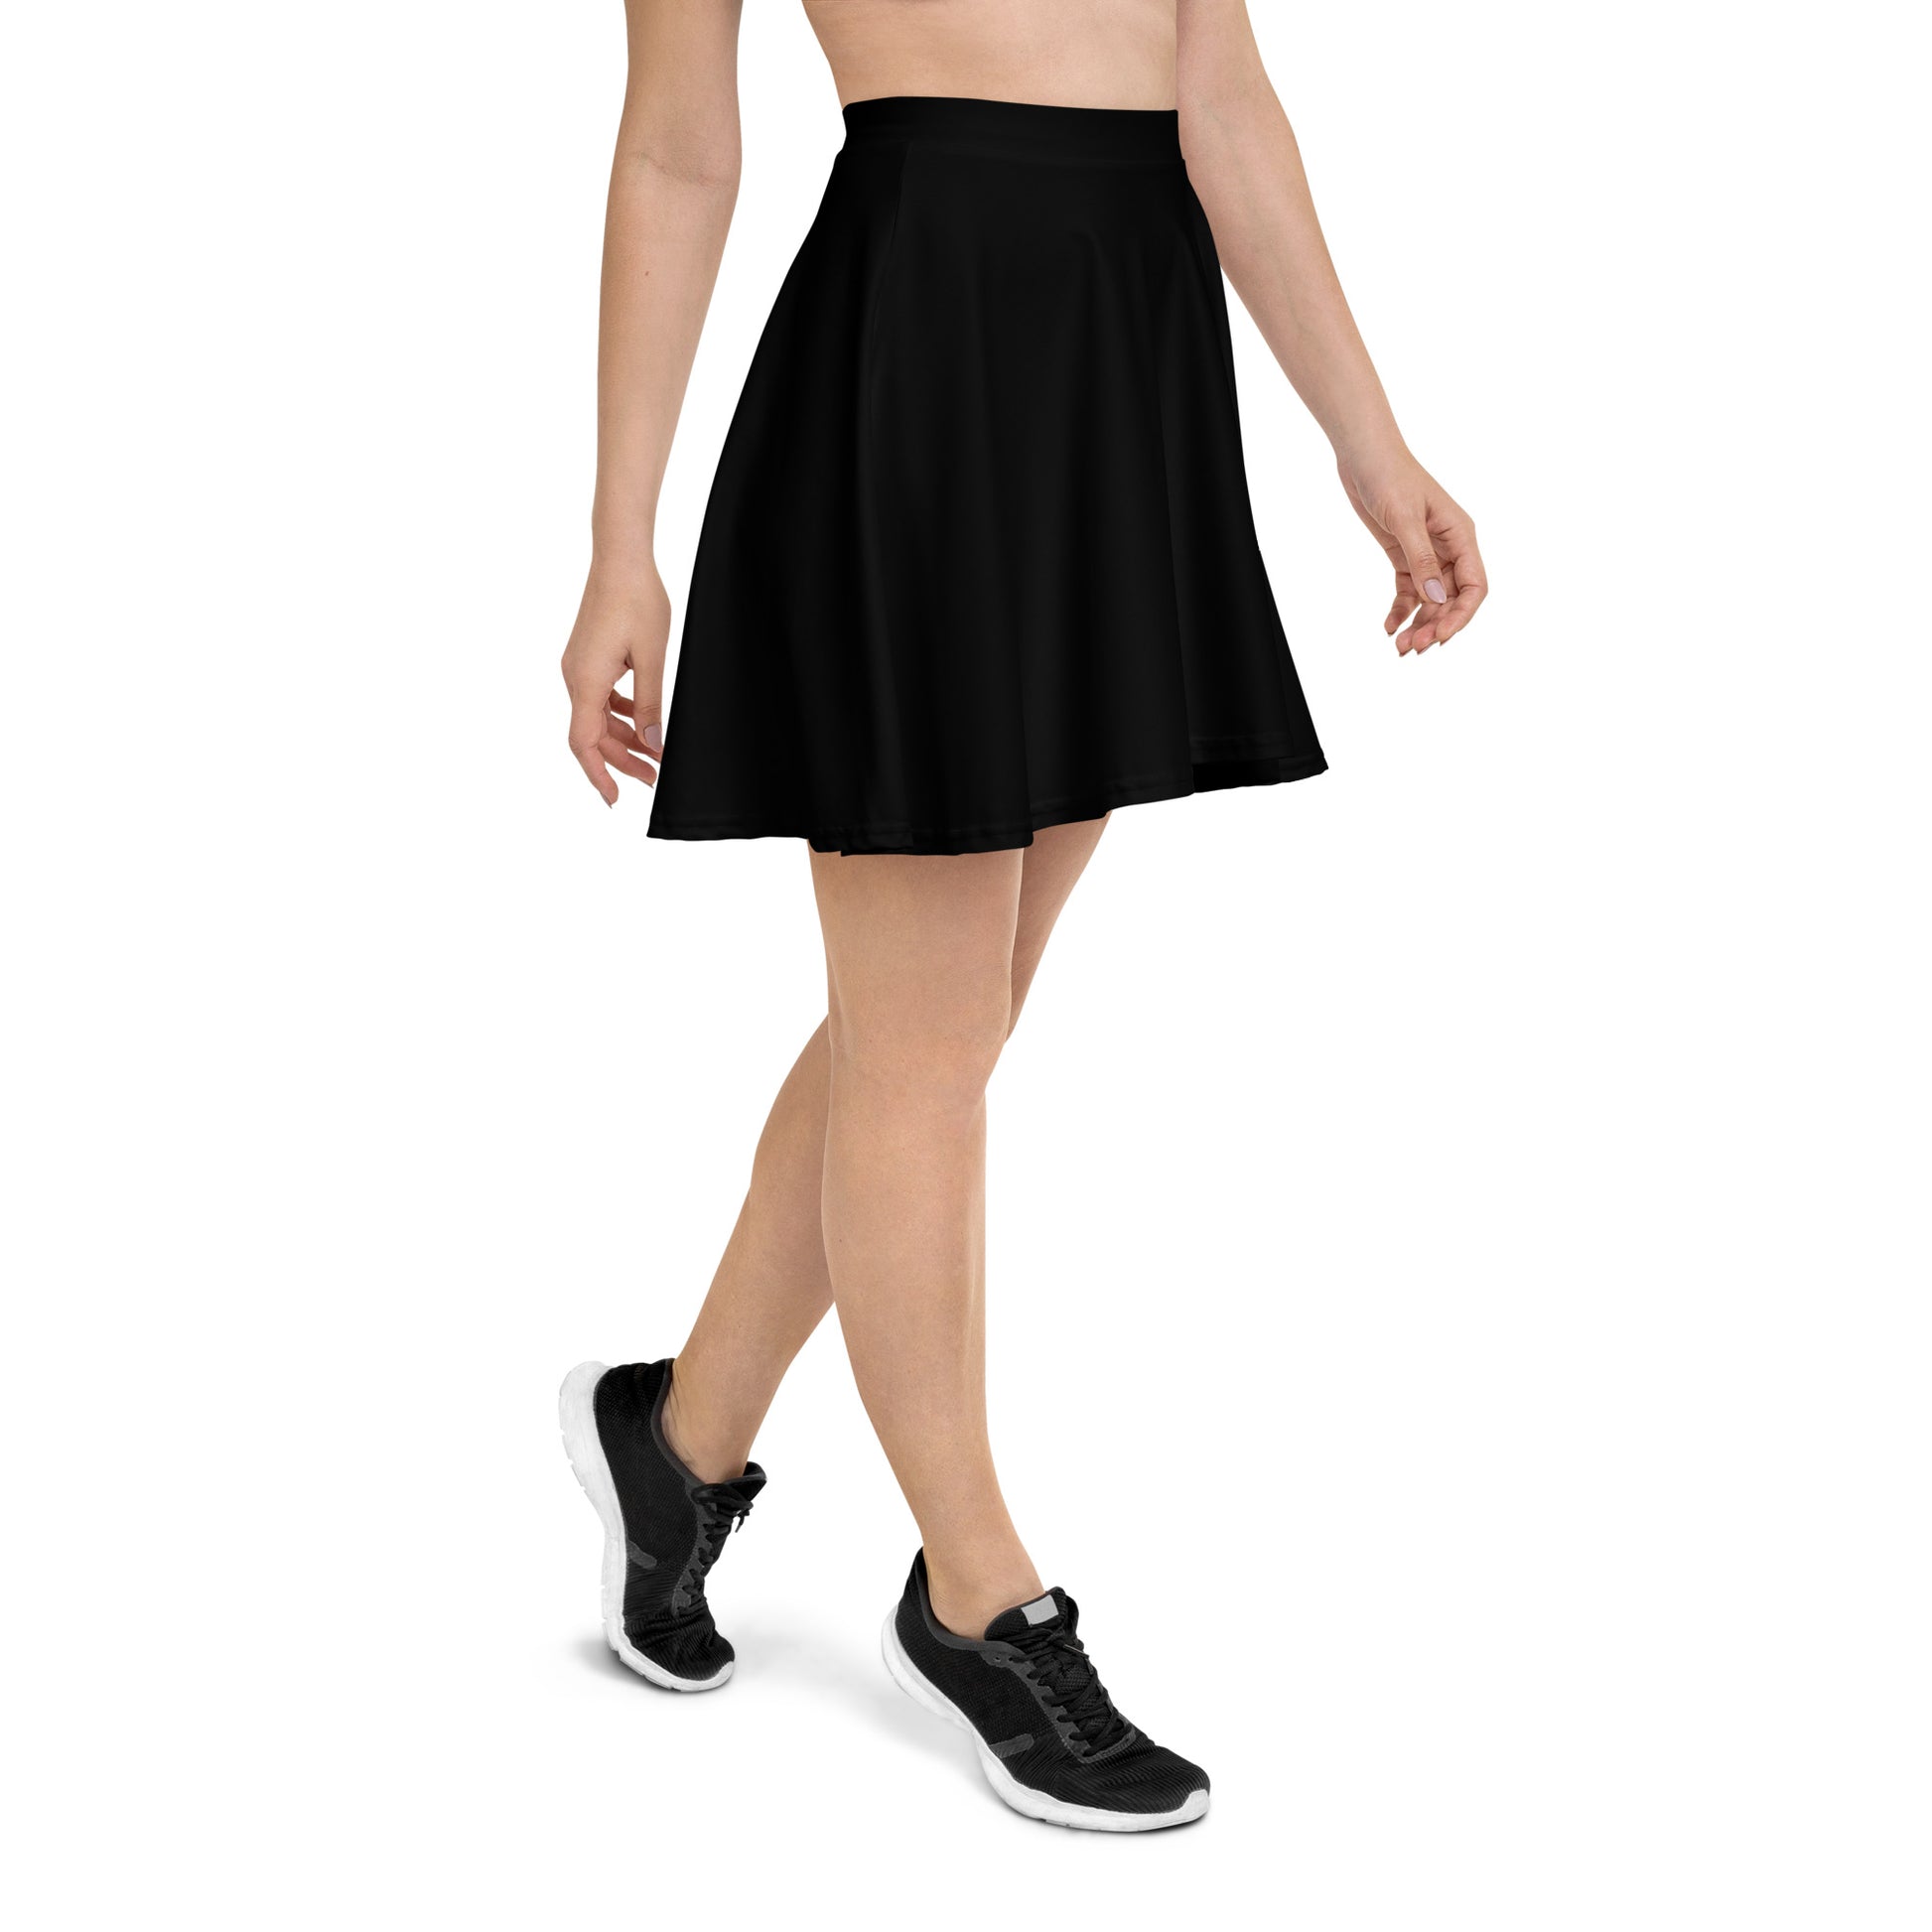 A picture of a woman waist down wearing a Products "Black" Skater Skirt and black shoes - right side